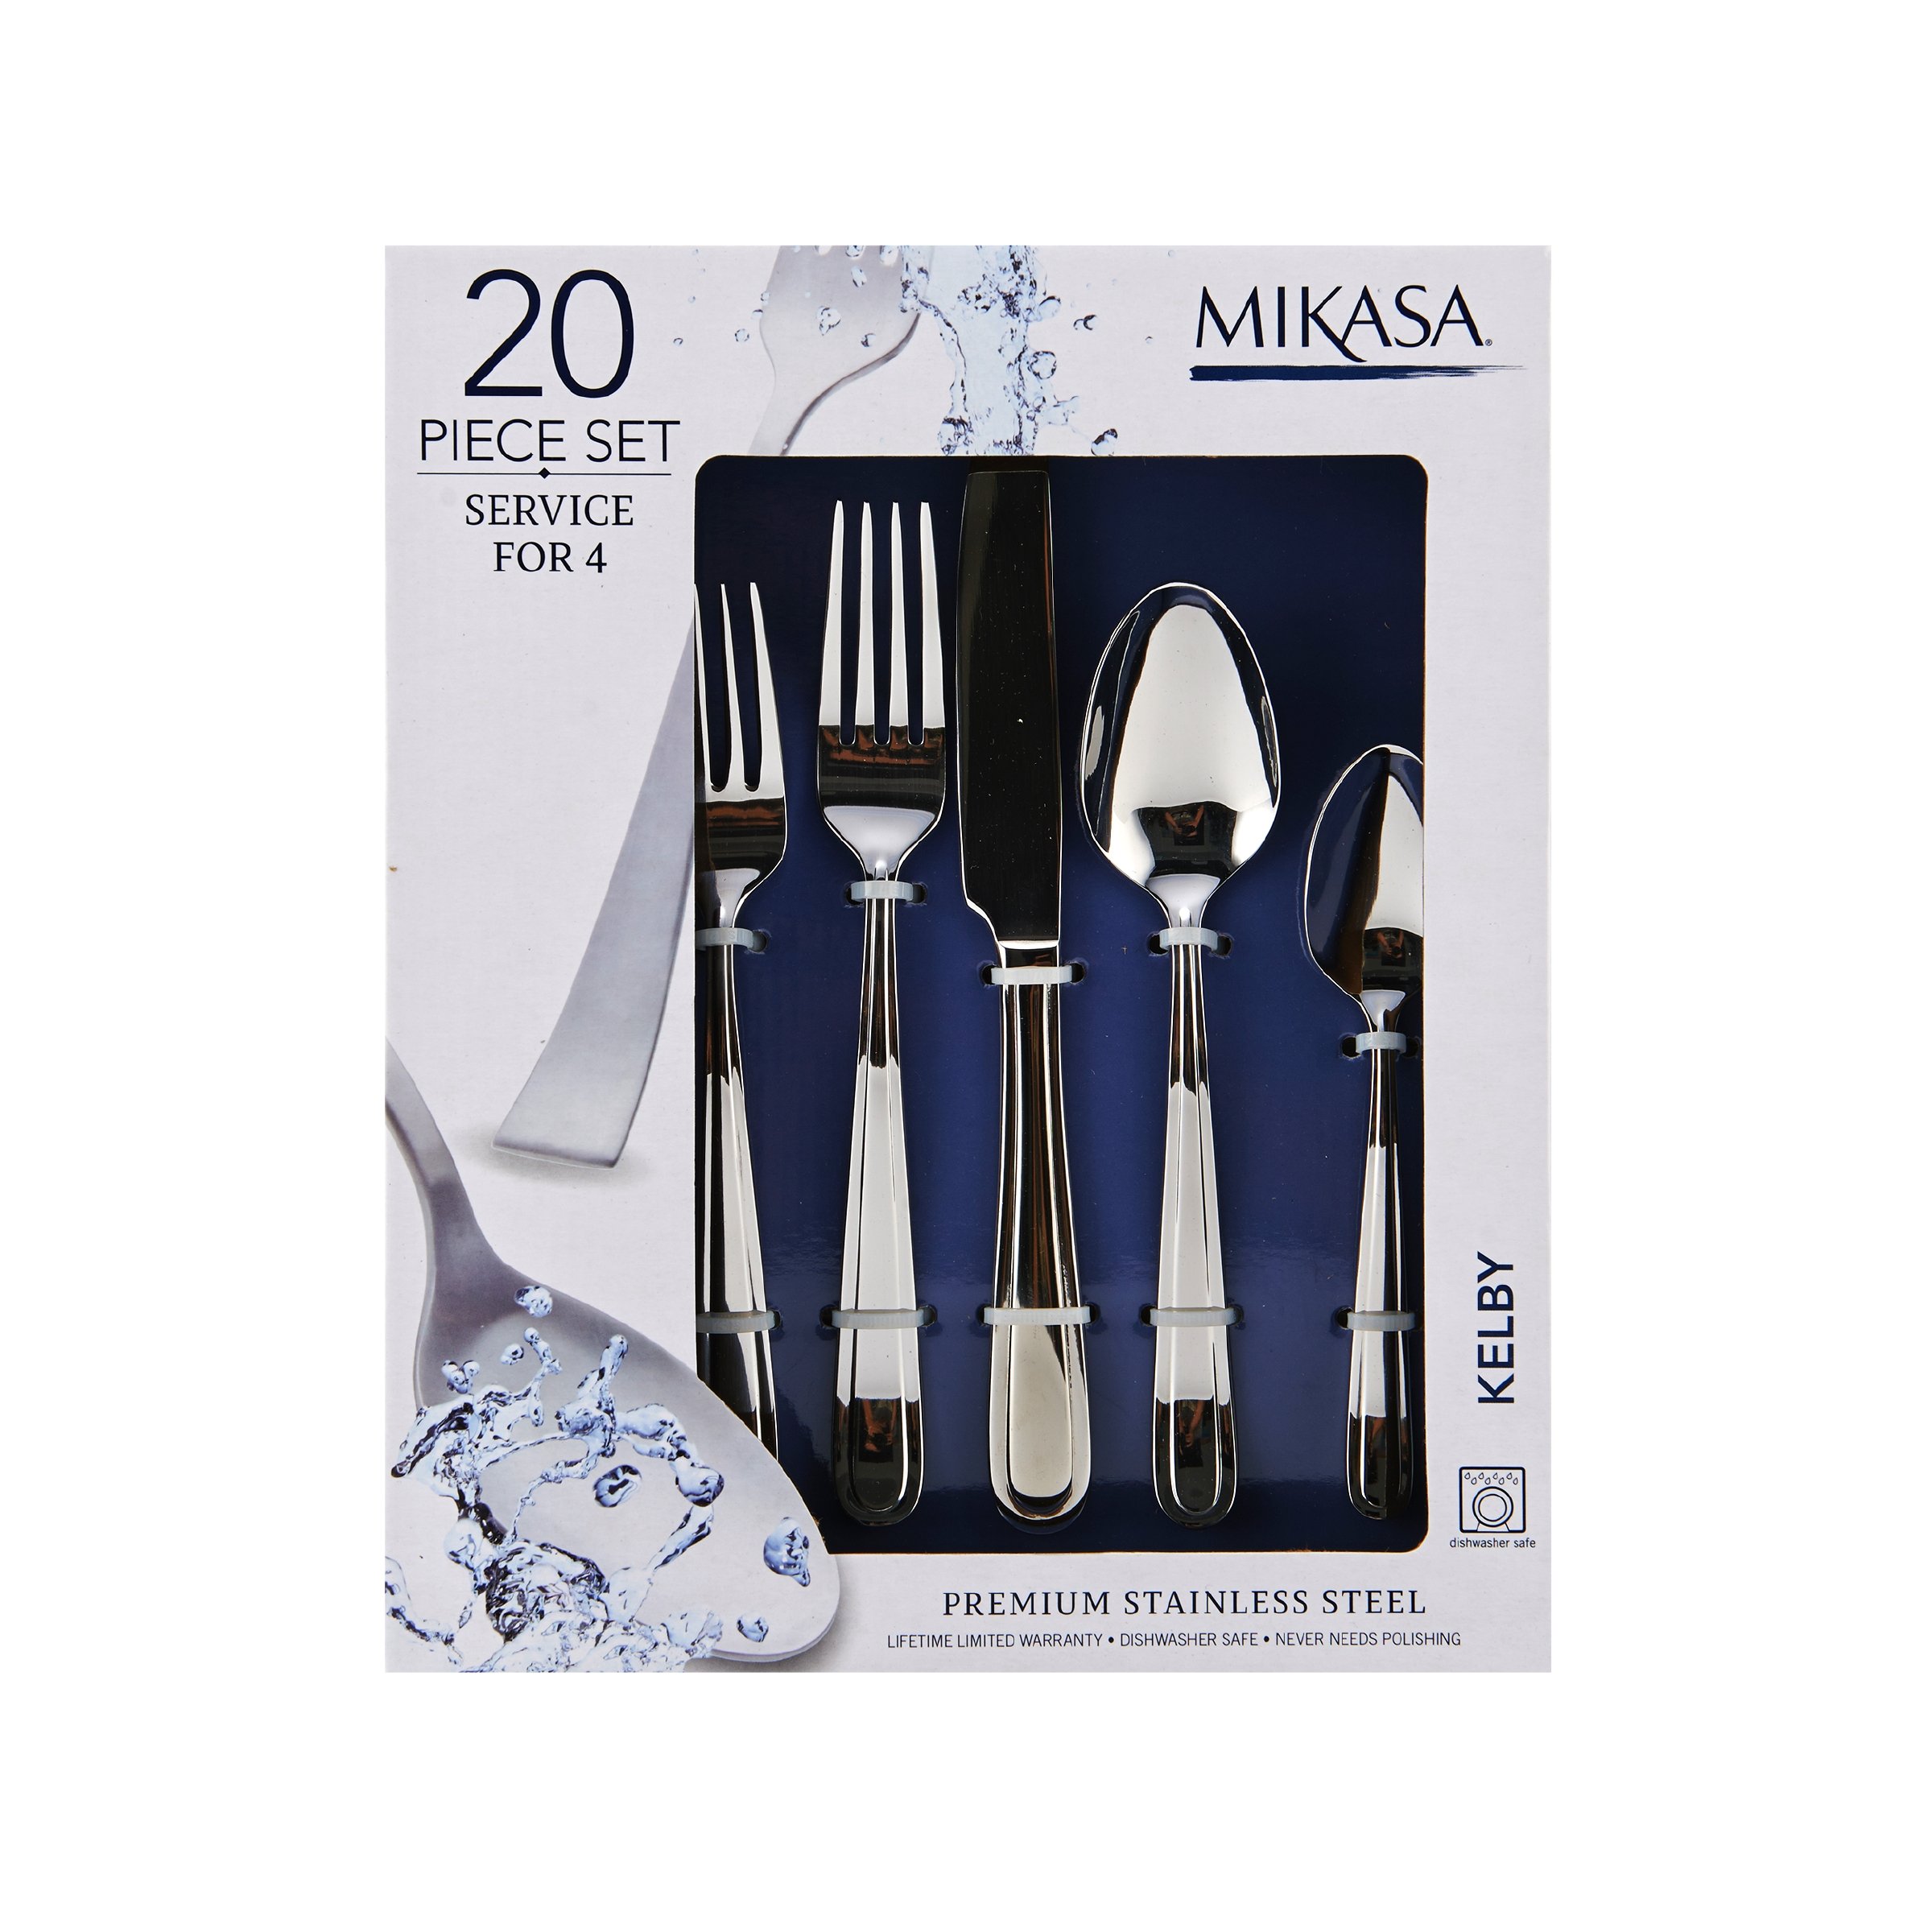 Mikasa Kelby Stainless Steel Flatware, 20-Piece Set, Service for 4